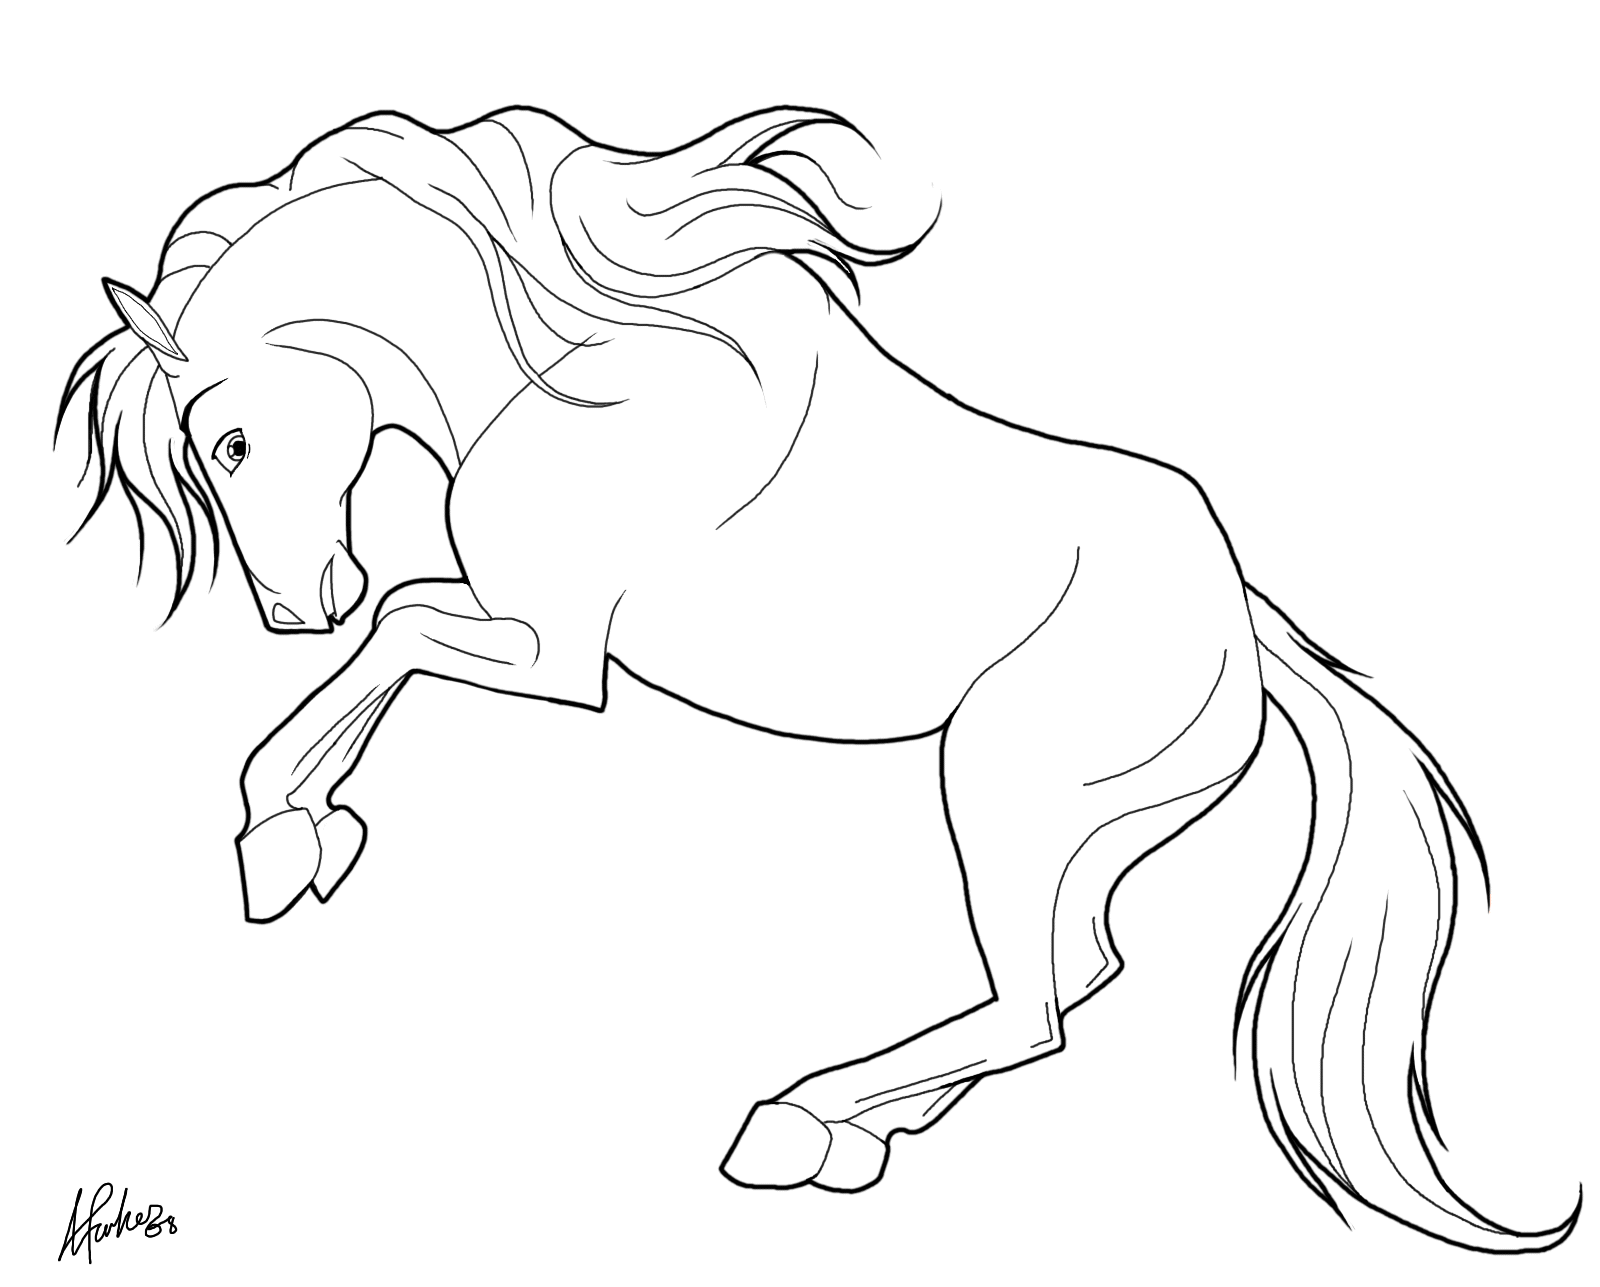 Horses to color for children : saluting horse - Horses ...